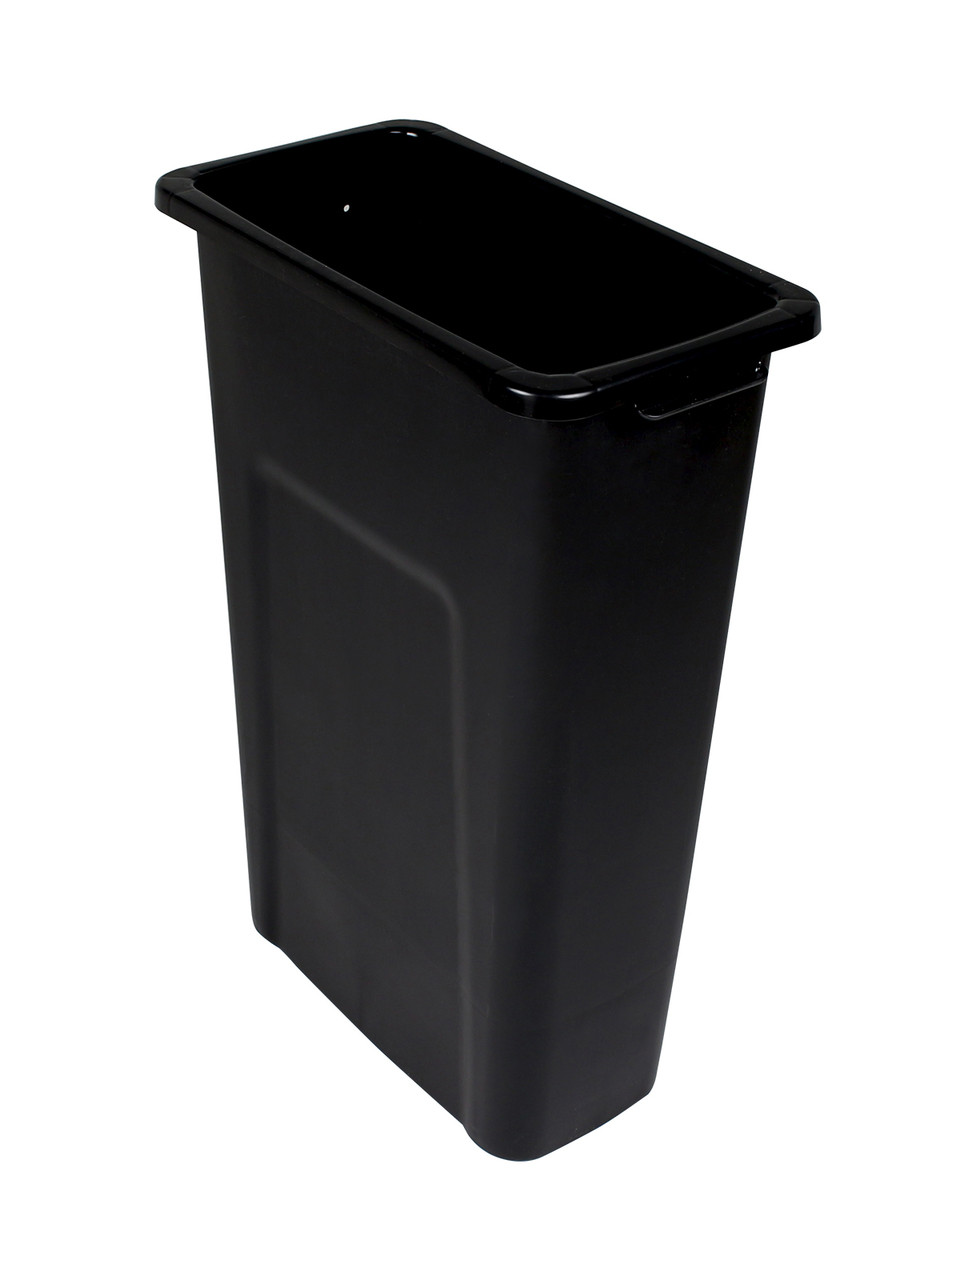 Recycling Bin 23 Gallon Slim Trash Container Garbage Can 